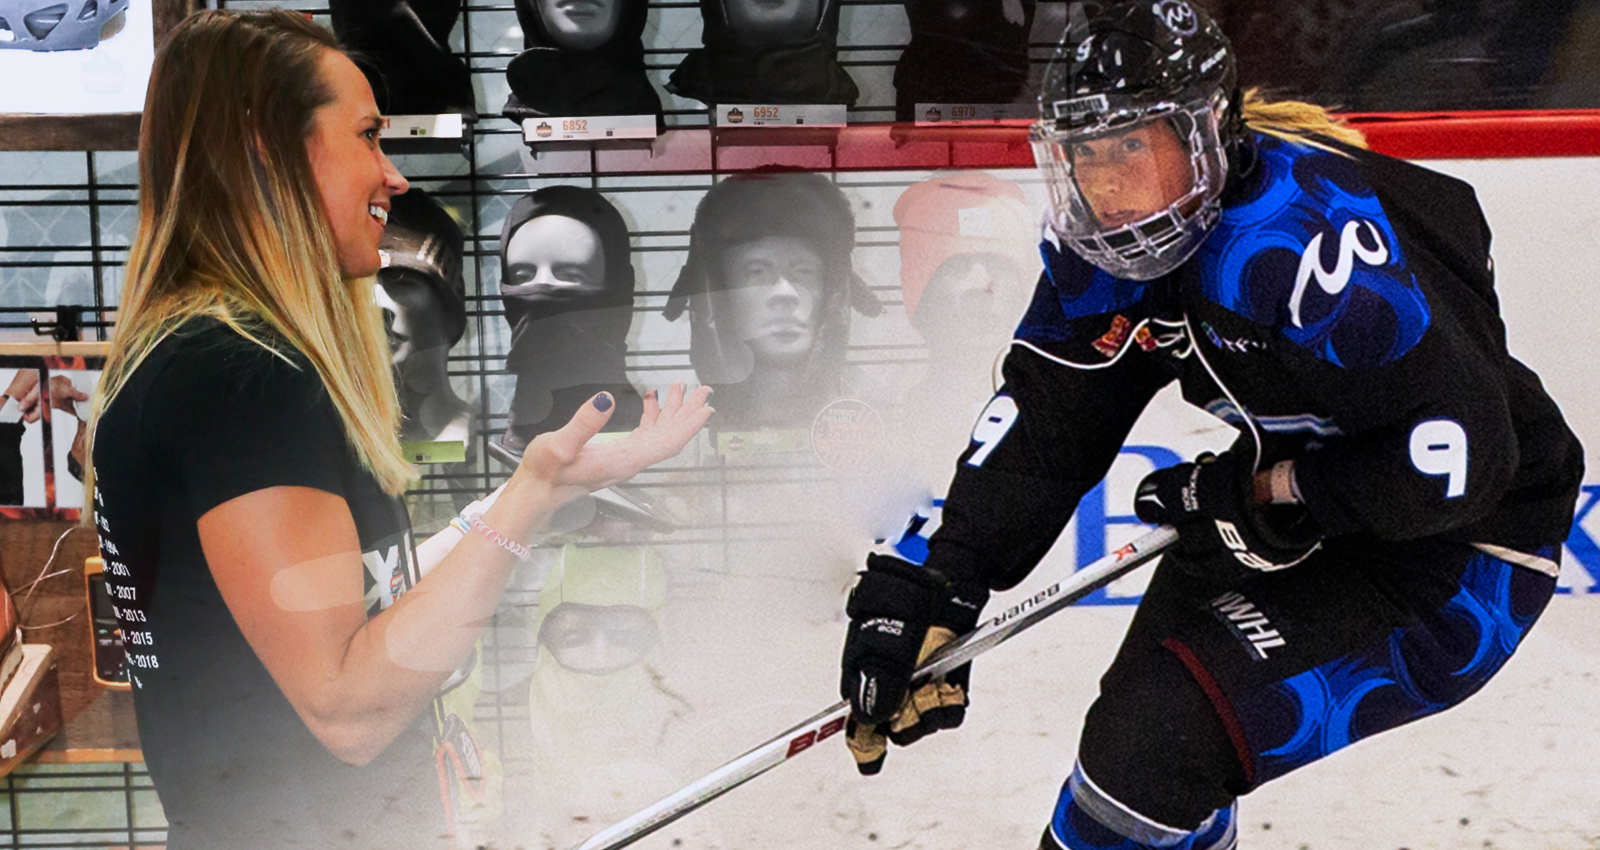 Women's hockey players hope to bring attention to pro game on